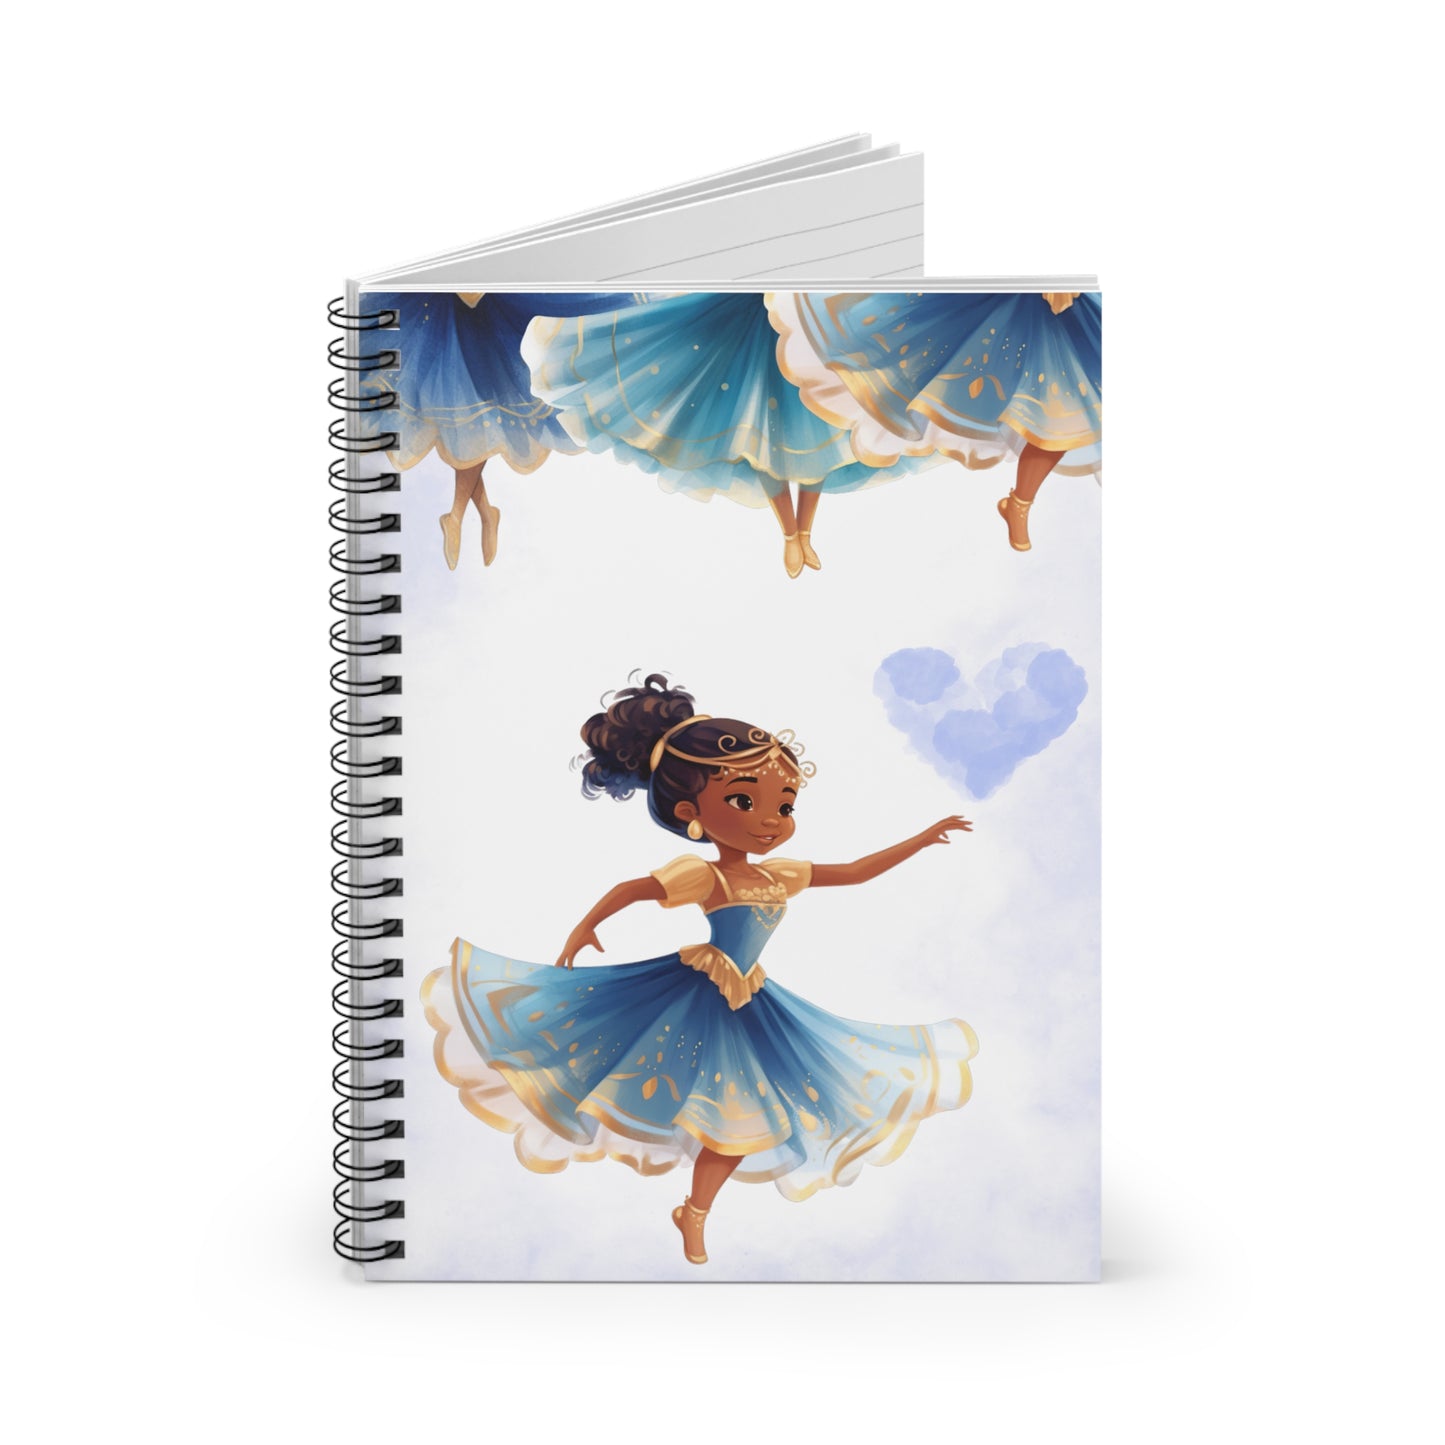 Tiny Dancer: Spiral Notebook - Log Books - Journals - Diaries - and More Custom Printed by TheGlassyLass